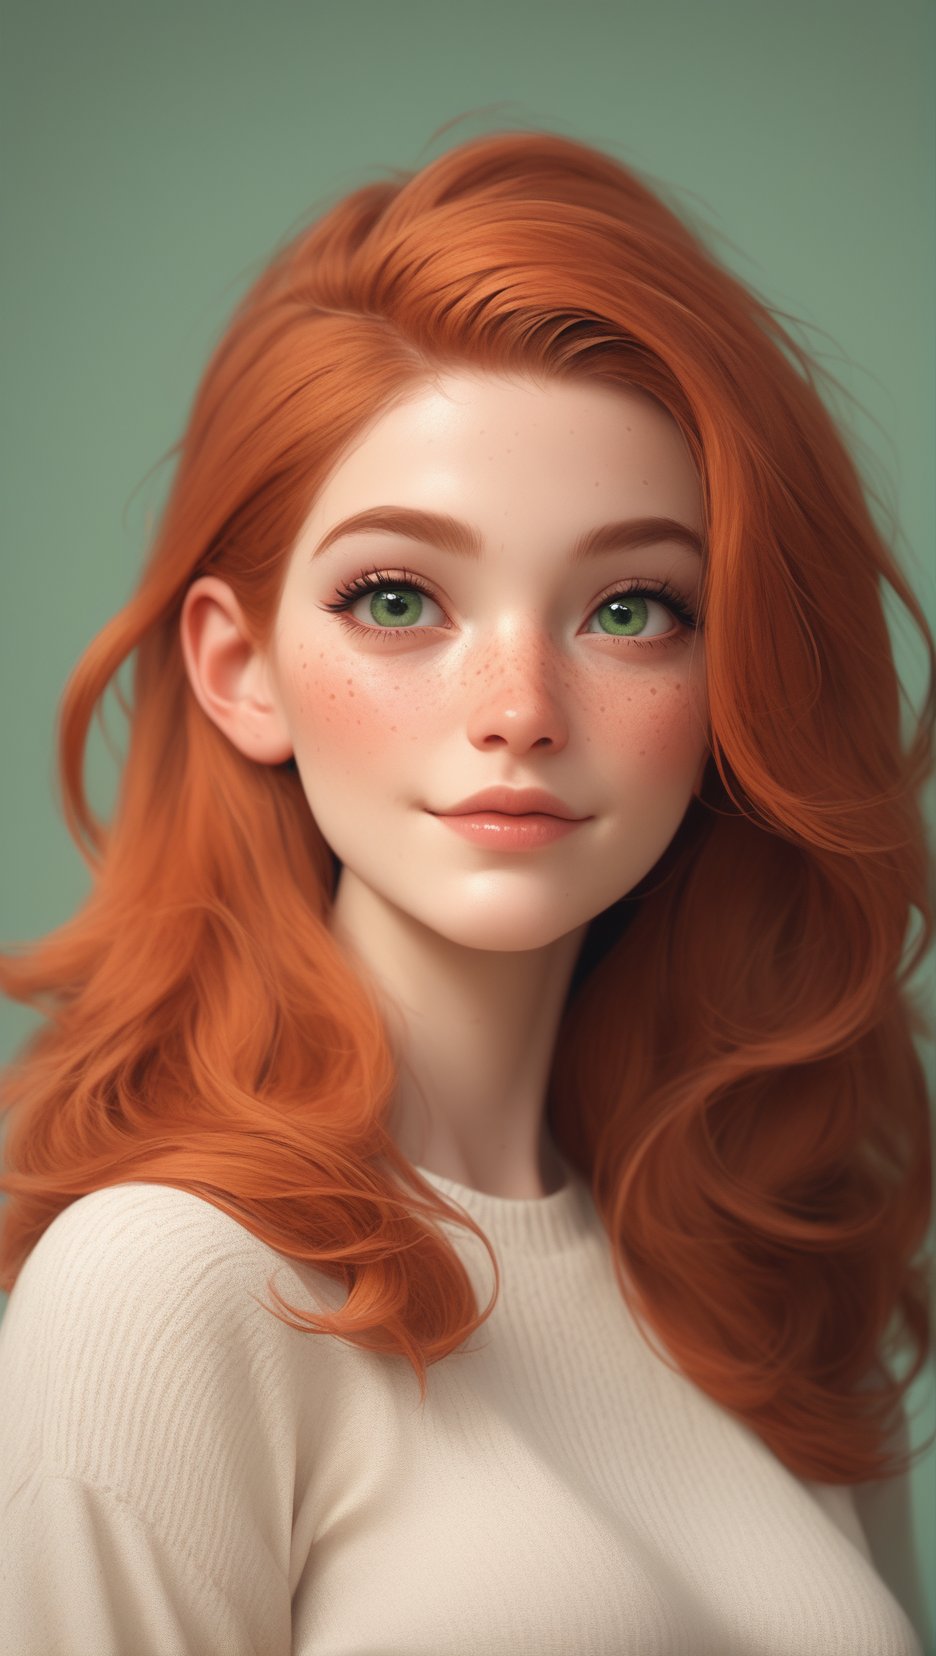 score_9, score_8_up, score_7_up, rating_questionable, girl, freckles, extremely attractive, adorable, cute, extremely pale skin, orange hair, green eyes, light directed at face, light illuminating face, 8k, redhead 